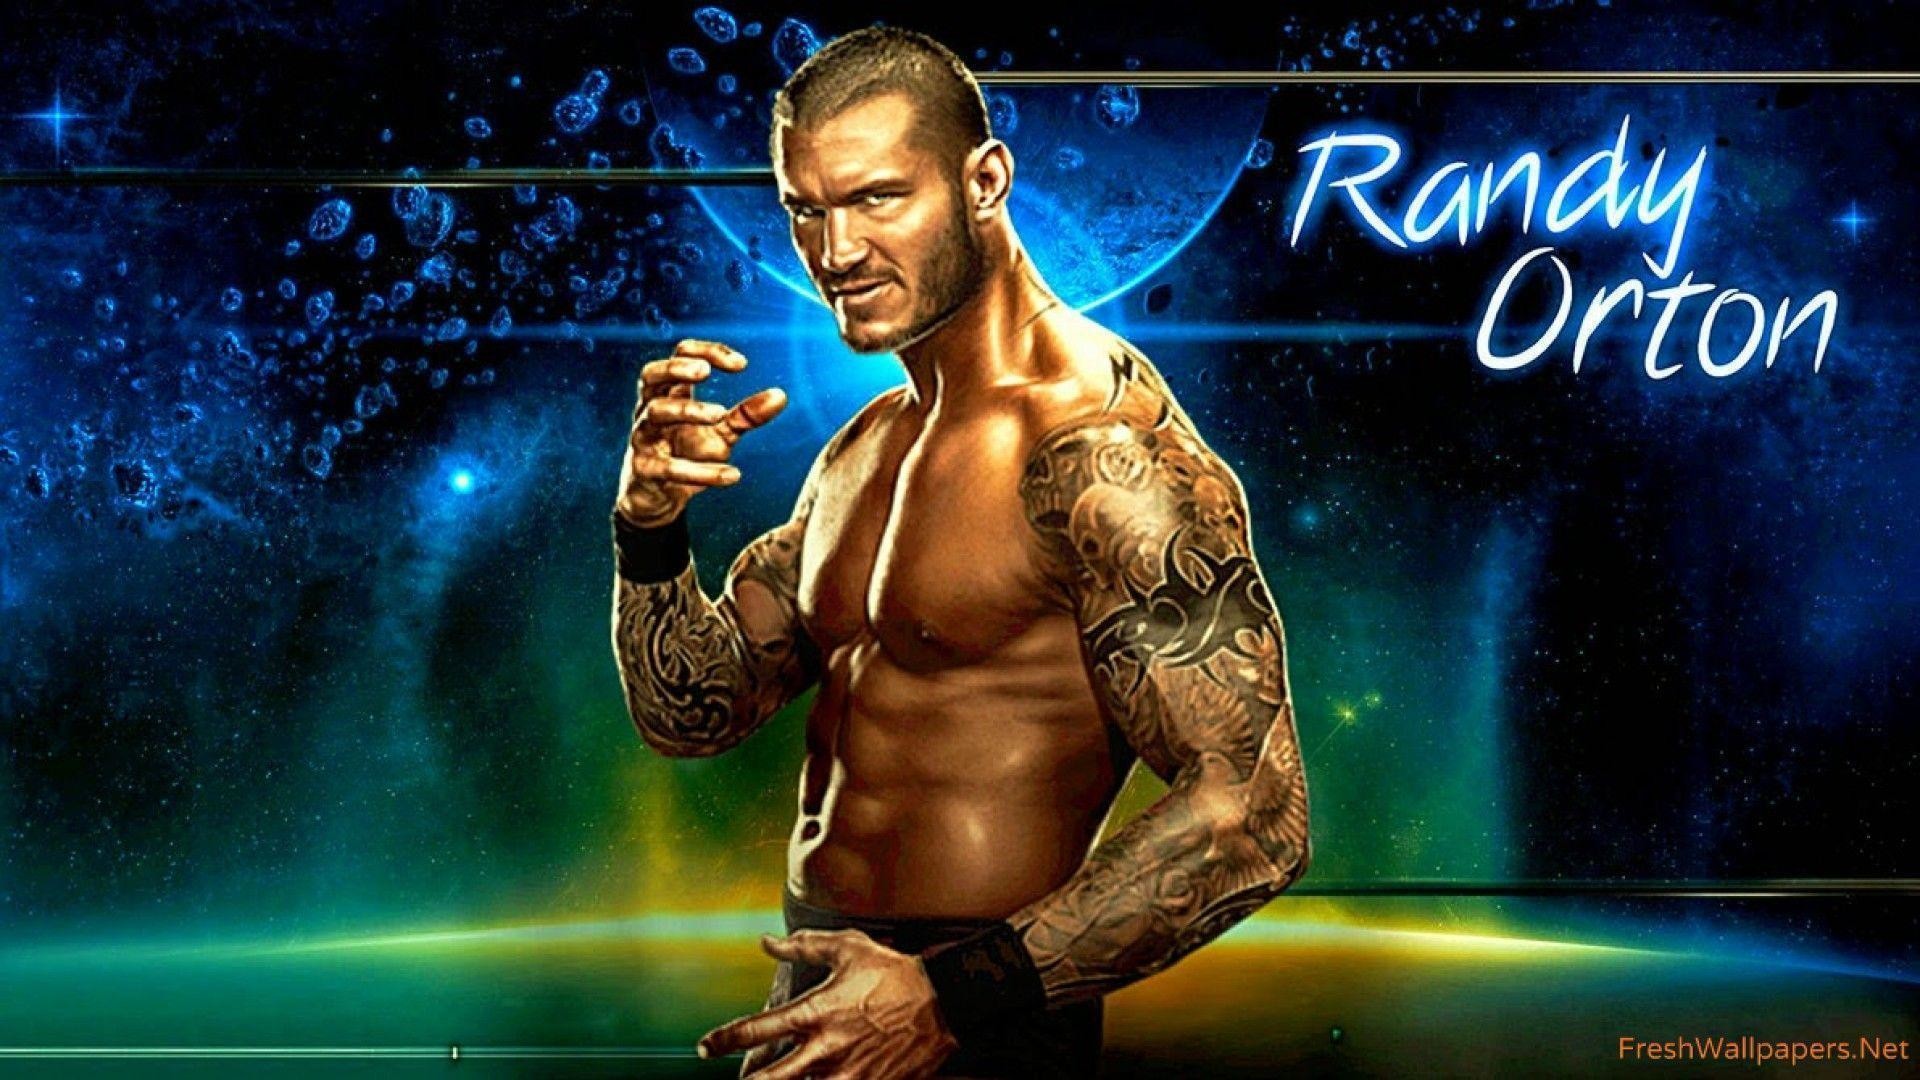 HD WWE Randy Orton Smiley Faces wallpapers Freshwallpapers 1920x1080.